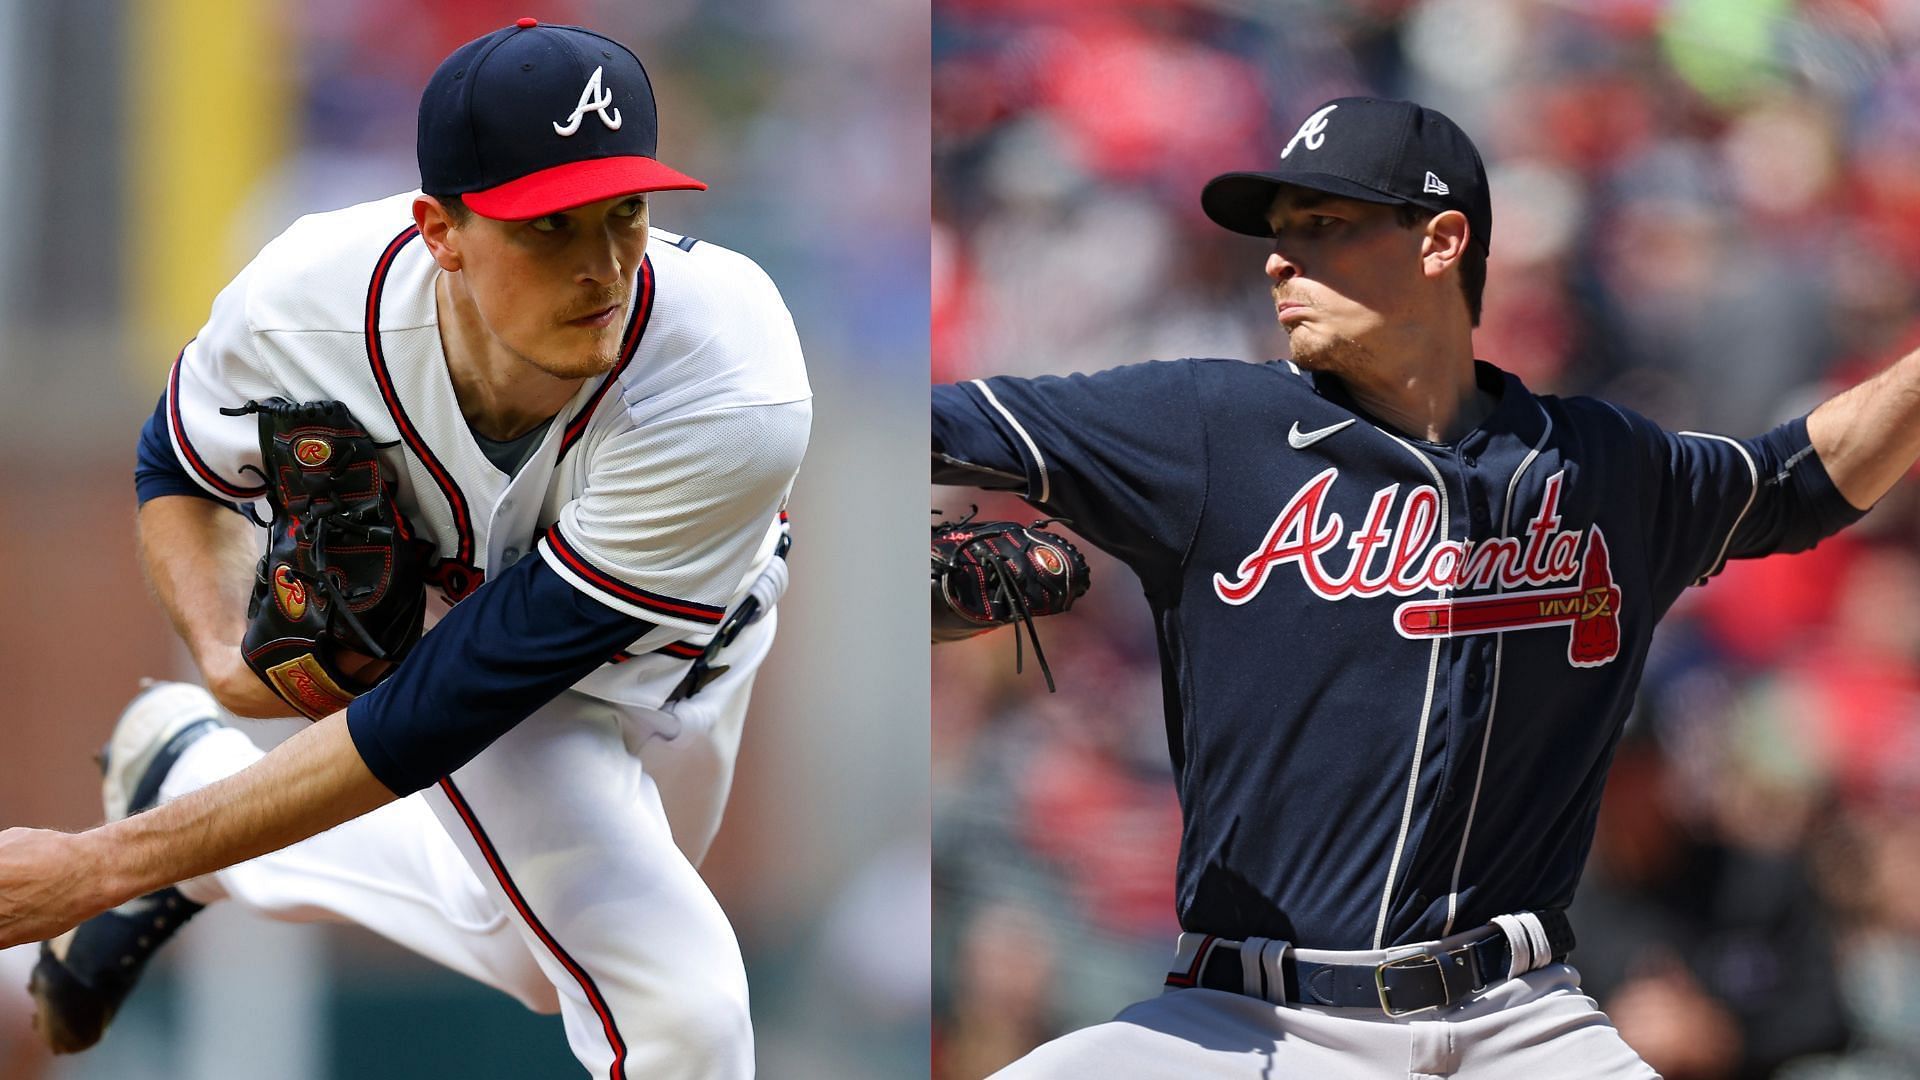 Atlanta Braves - Your Opening Day starter: Max Fried!